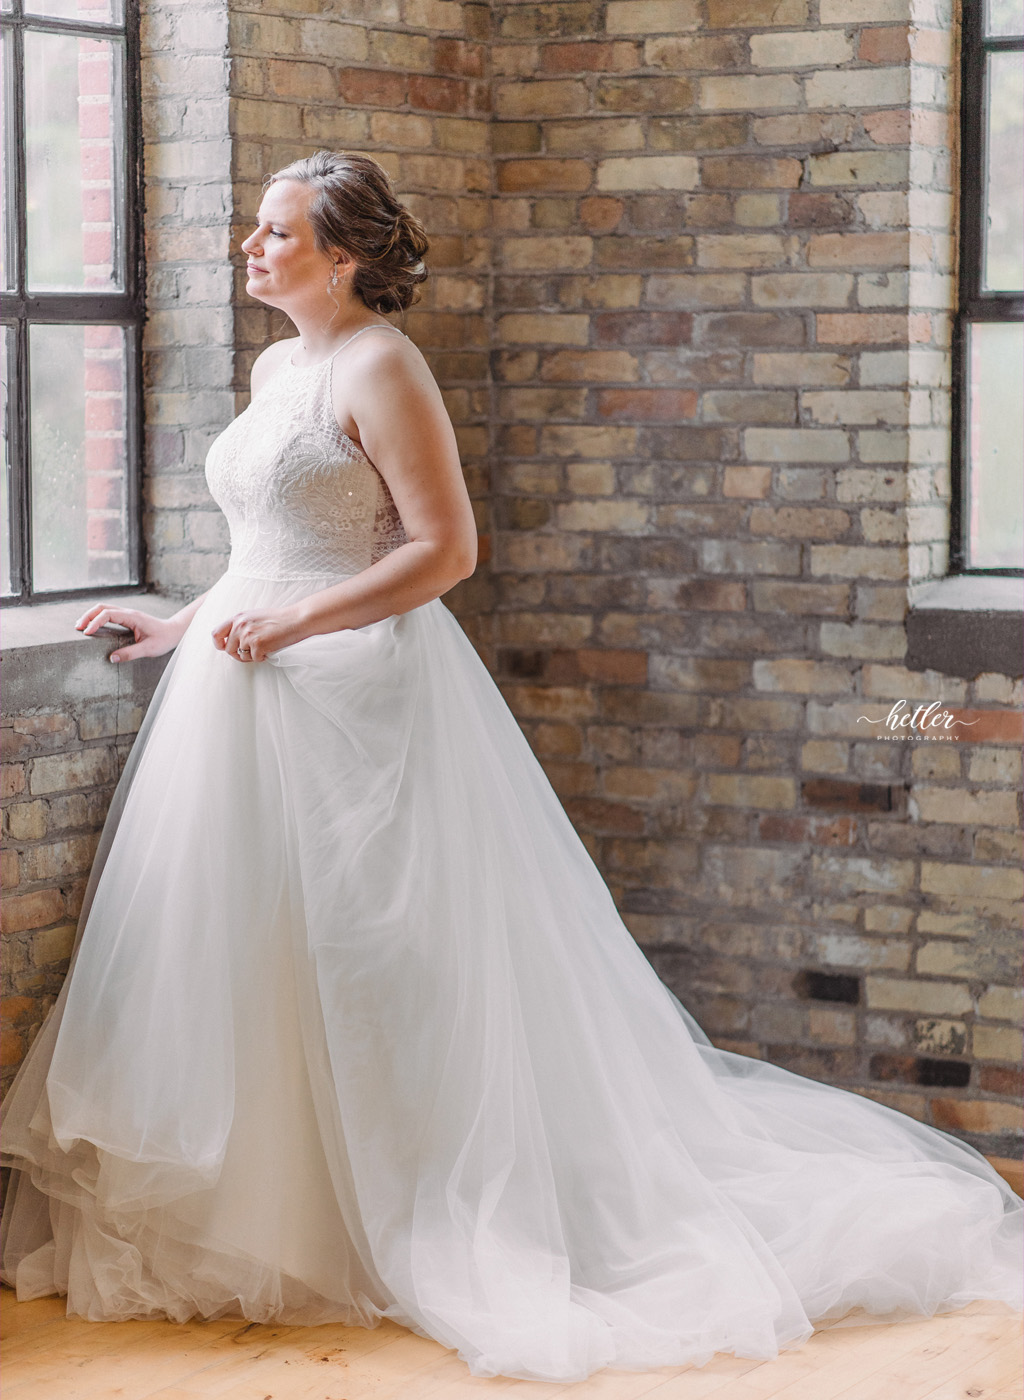 Spring warehouse wedding in downtown Grand Rapids Michigan at Studio D2D with dusty rose and navy colors